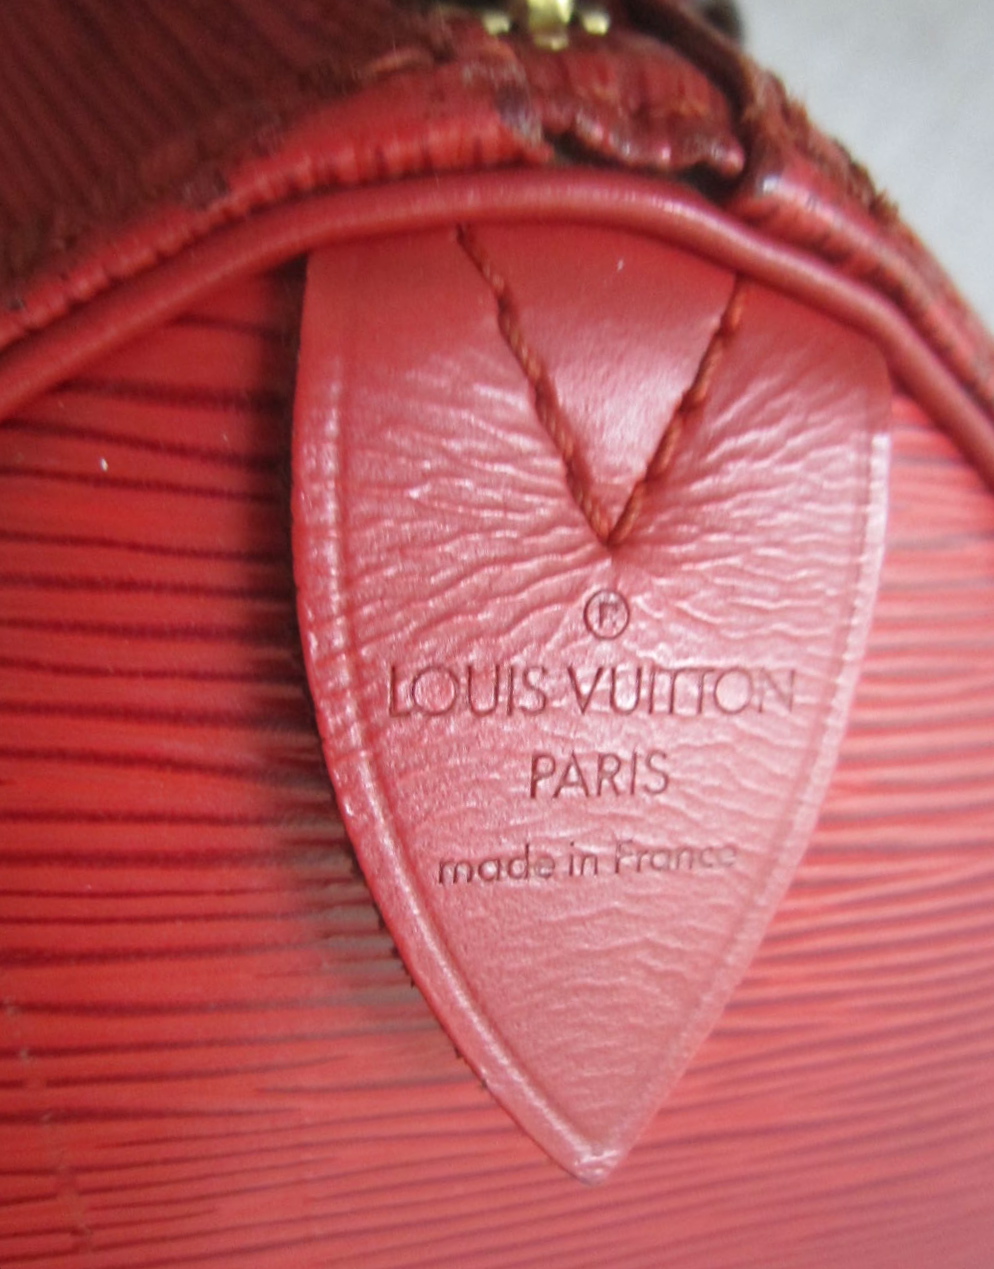 Louis Vuitton - Authenticated Speedy Handbag - Leather Red Plain for Women, Very Good Condition